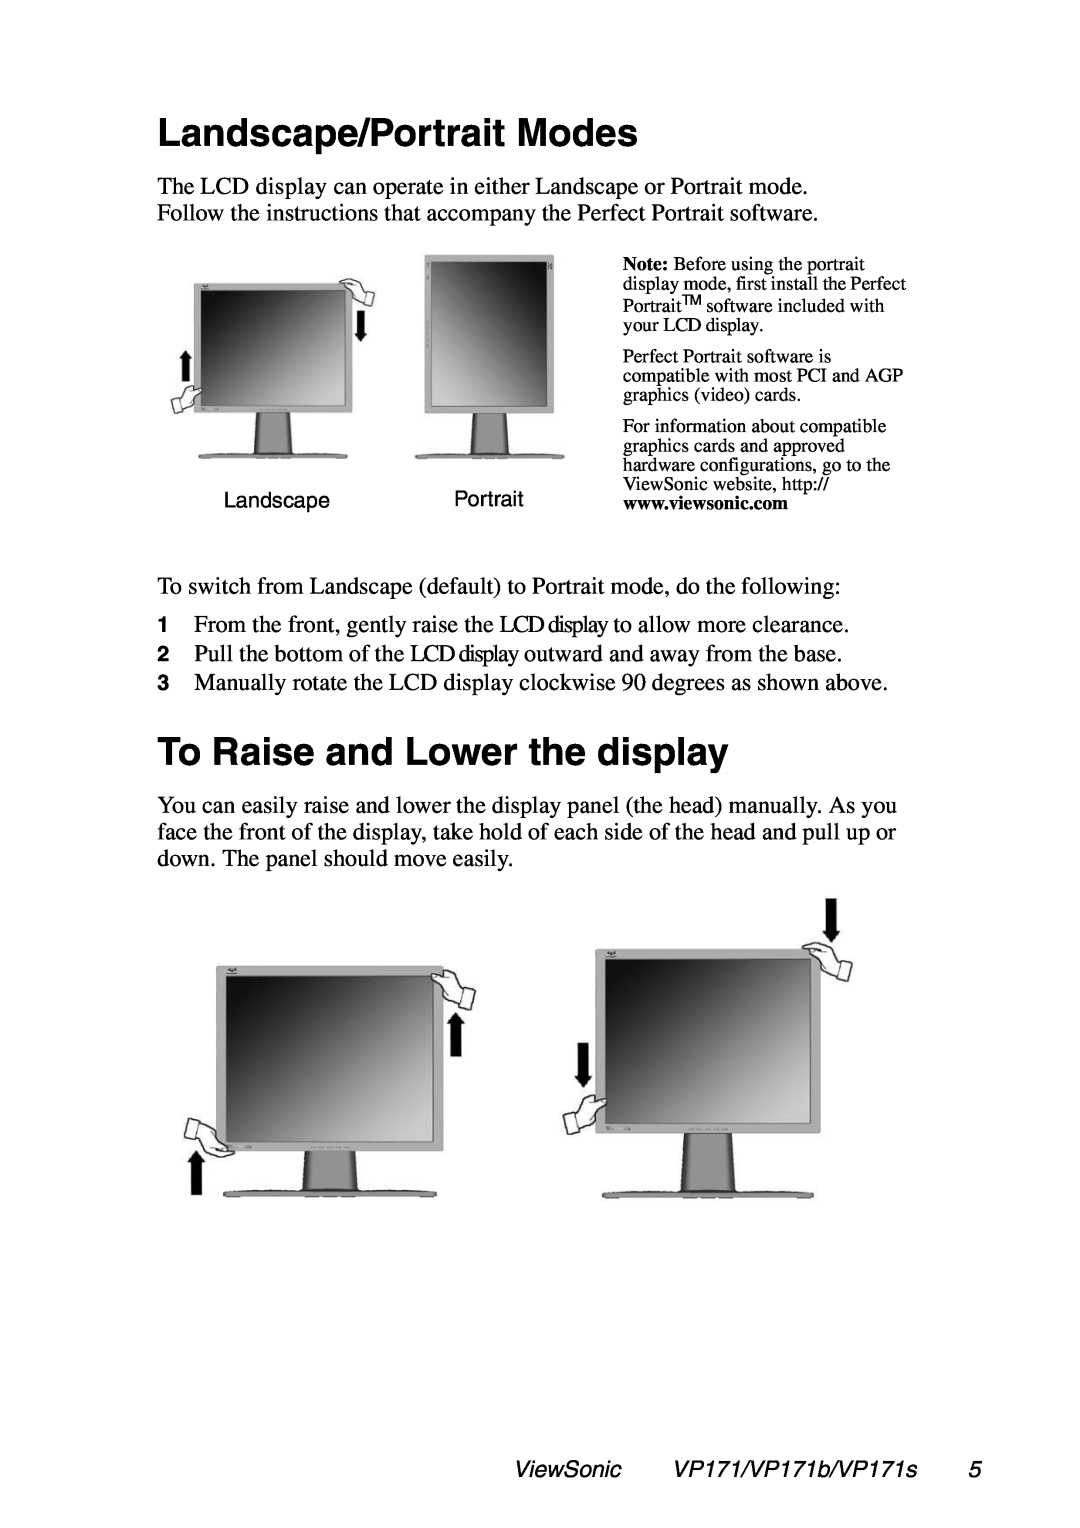 ViewSonic VP171S, VP171b manual Landscape/Portrait Modes, To Raise and Lower the display 